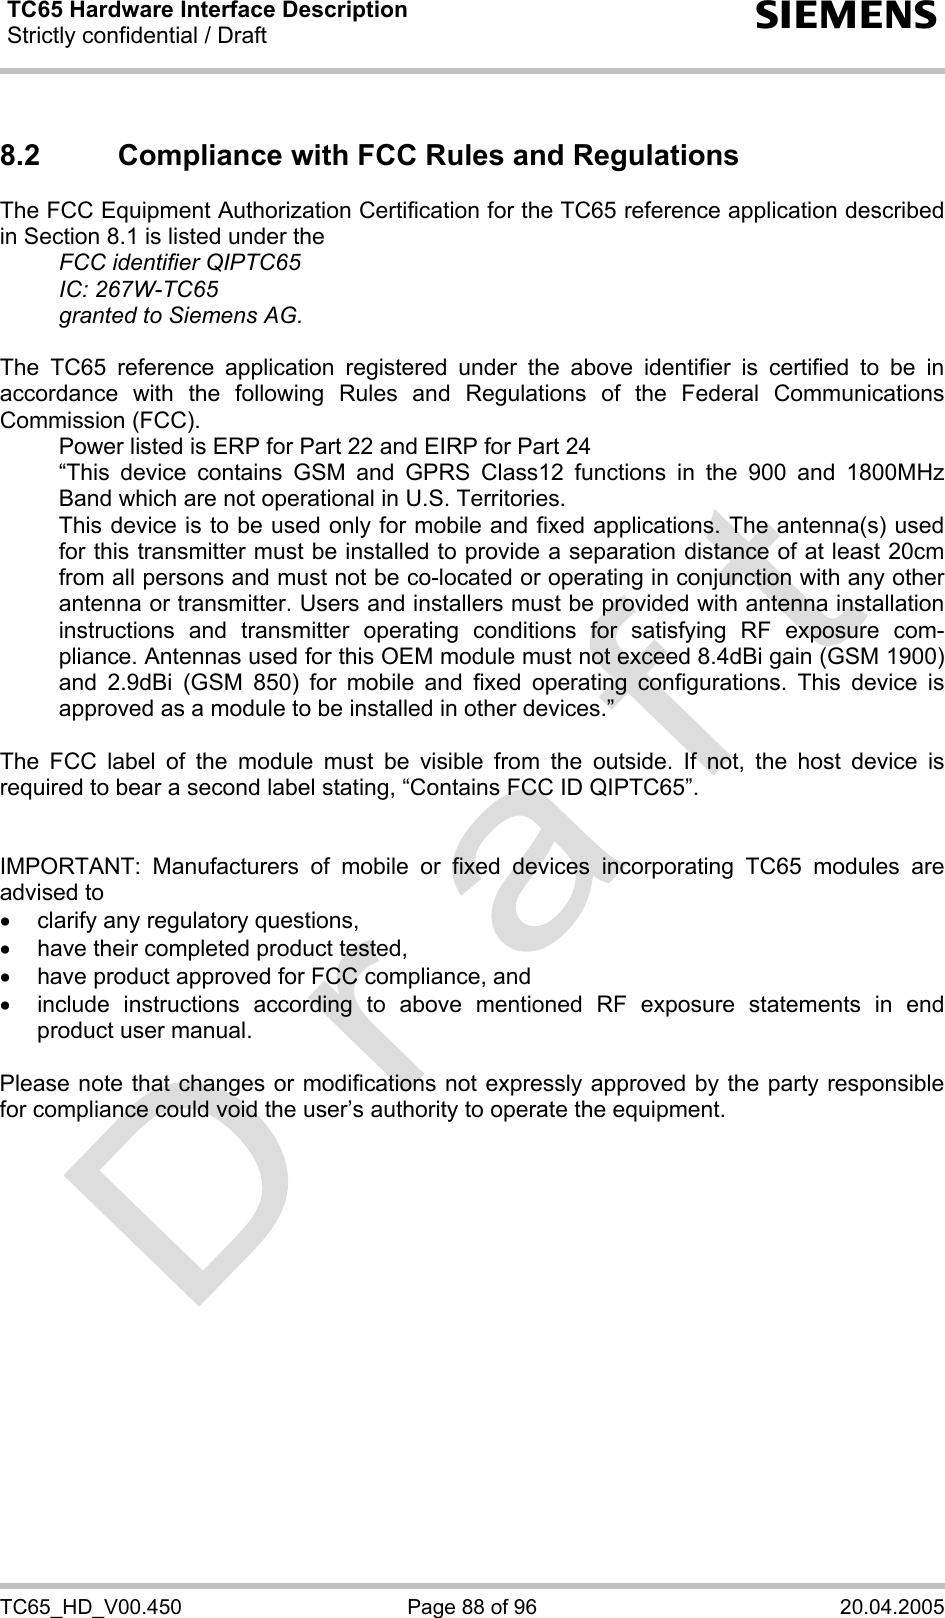 TC65 Hardware Interface Description Strictly confidential / Draft  s TC65_HD_V00.450  Page 88 of 96  20.04.2005 8.2  Compliance with FCC Rules and Regulations  The FCC Equipment Authorization Certification for the TC65 reference application described in Section 8.1 is listed under the   FCC identifier QIPTC65  IC: 267W-TC65   granted to Siemens AG.   The TC65 reference application registered under the above identifier is certified to be in accordance with the following Rules and Regulations of the Federal Communications Commission (FCC).    Power listed is ERP for Part 22 and EIRP for Part 24   “This device contains GSM and GPRS Class12 functions in the 900 and 1800MHz Band which are not operational in U.S. Territories.    This device is to be used only for mobile and fixed applications. The antenna(s) used for this transmitter must be installed to provide a separation distance of at least 20cm from all persons and must not be co-located or operating in conjunction with any other antenna or transmitter. Users and installers must be provided with antenna installation instructions and transmitter operating conditions for satisfying RF exposure com-pliance. Antennas used for this OEM module must not exceed 8.4dBi gain (GSM 1900) and 2.9dBi (GSM 850) for mobile and fixed operating configurations. This device is approved as a module to be installed in other devices.”   The FCC label of the module must be visible from the outside. If not, the host device is required to bear a second label stating, “Contains FCC ID QIPTC65”.   IMPORTANT: Manufacturers of mobile or fixed devices incorporating TC65 modules are advised to •  clarify any regulatory questions, •  have their completed product tested, •  have product approved for FCC compliance, and •  include instructions according to above mentioned RF exposure statements in end product user manual.   Please note that changes or modifications not expressly approved by the party responsible for compliance could void the user’s authority to operate the equipment.  